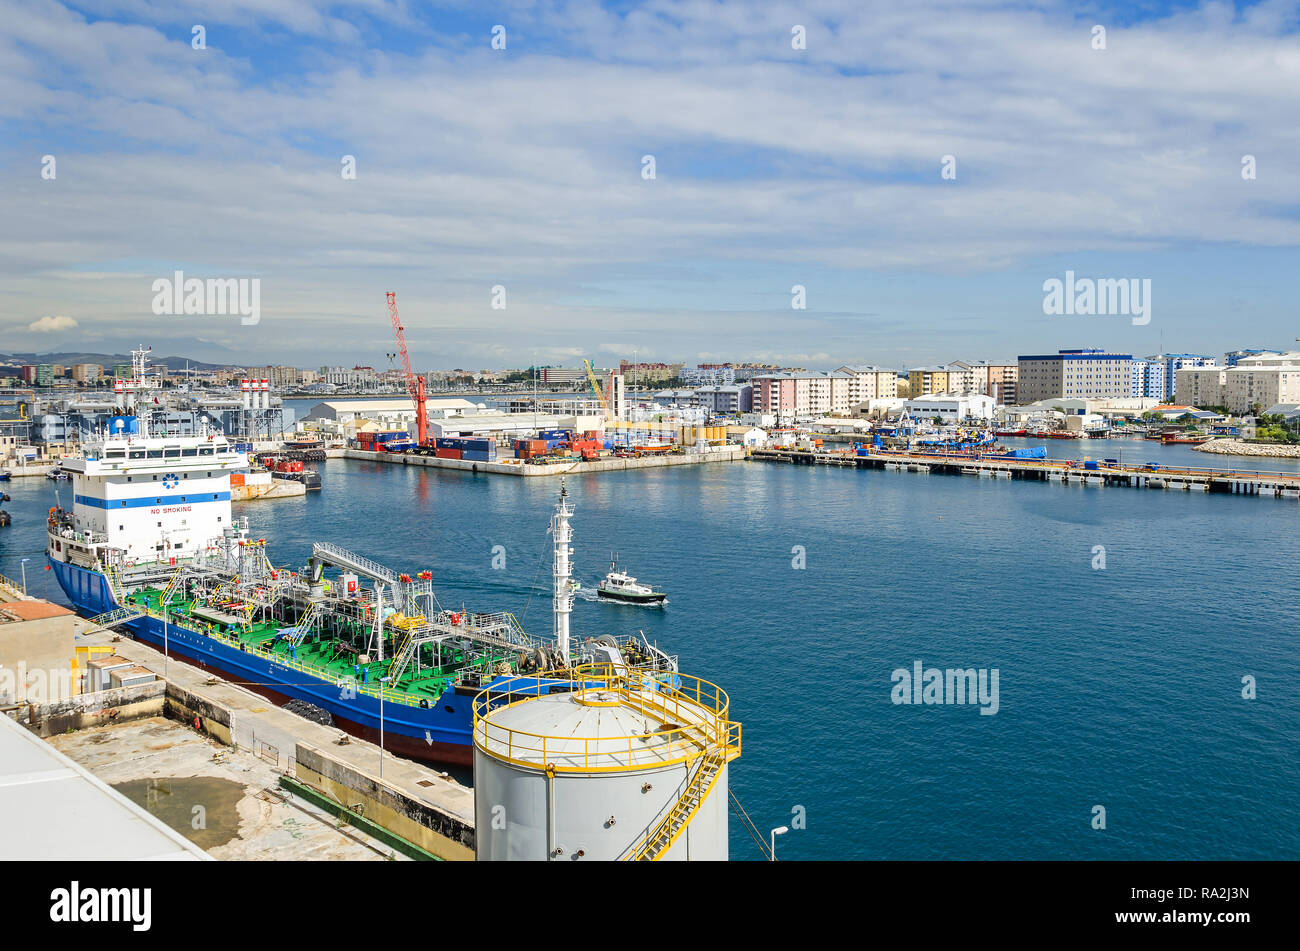 Gibraltar, British Overseas Territory -  November 8, 2018: Harbor and the Bay of Gibraltar with its colorful rail cranes, containers, ships and  boats Stock Photo